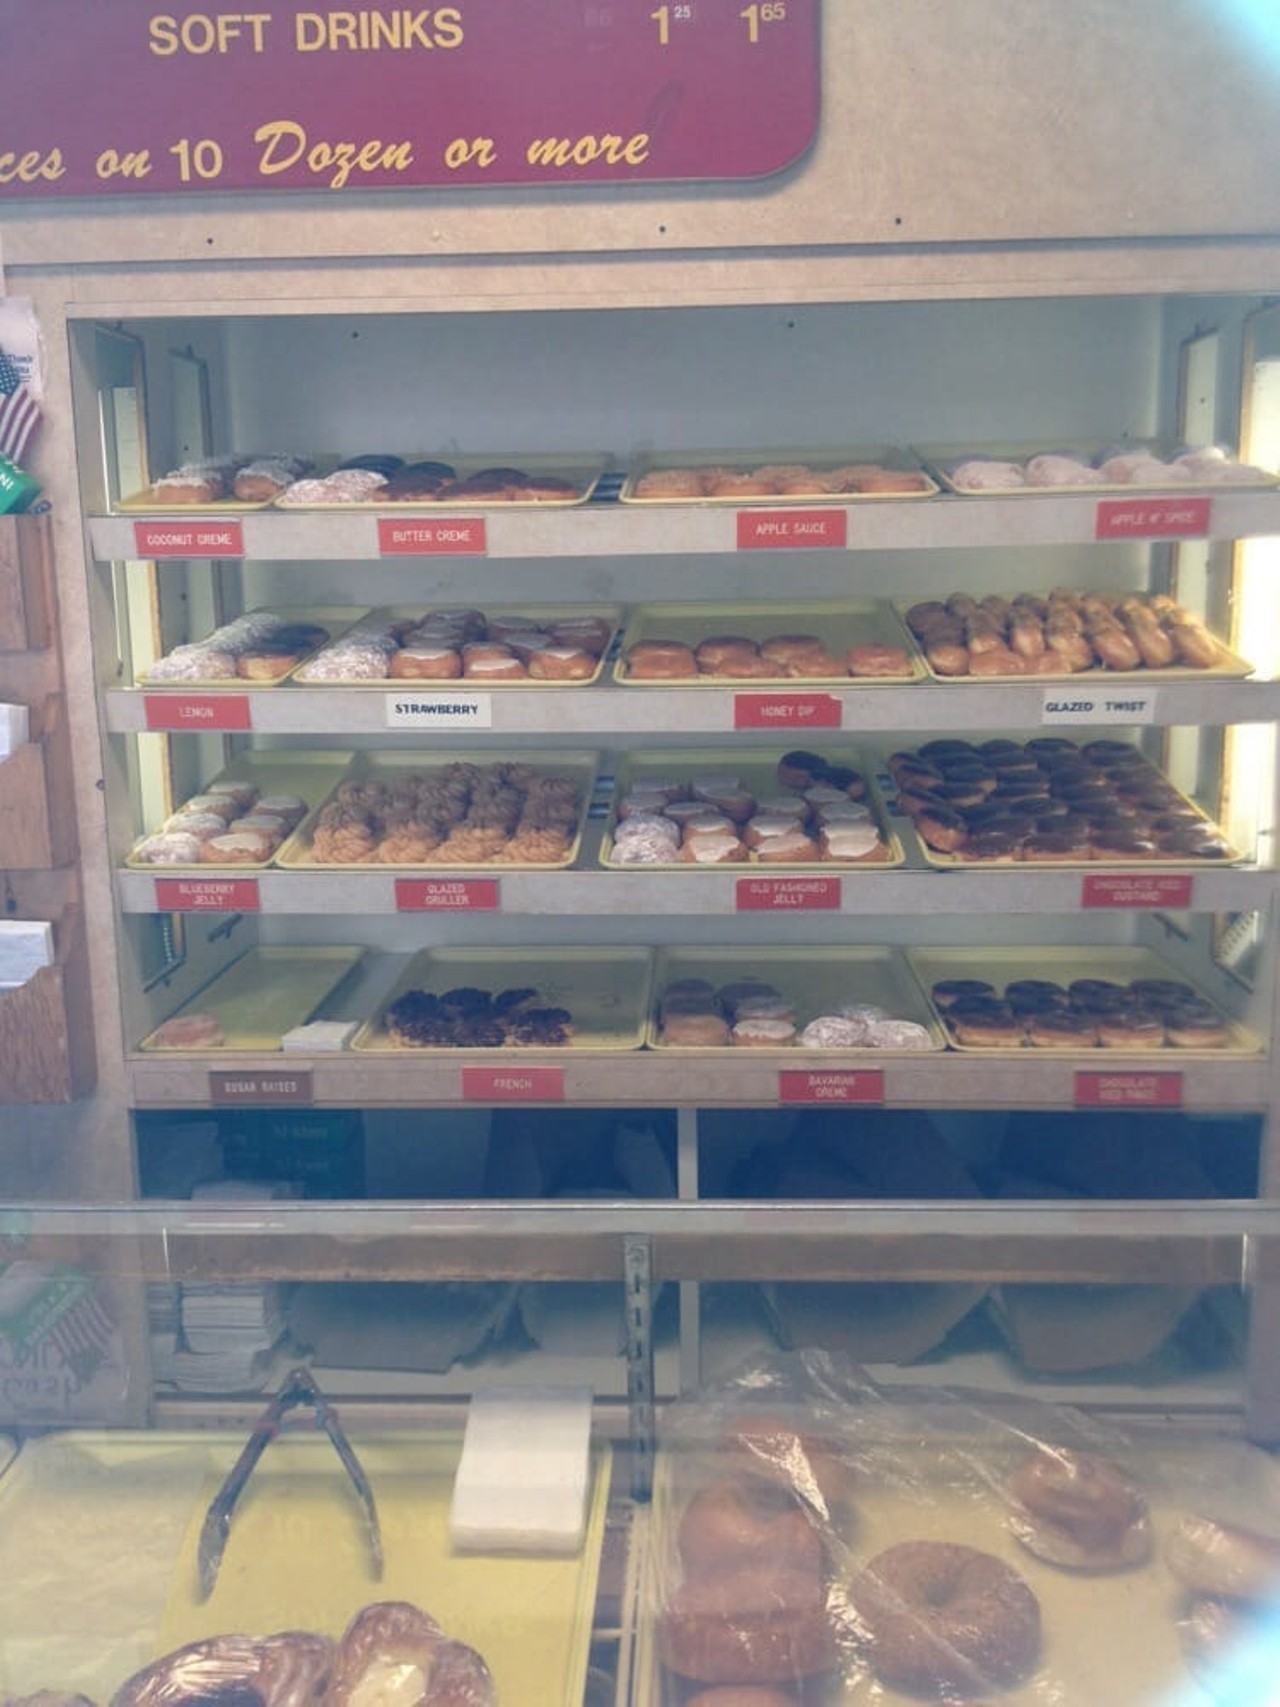  Donutown
Location :25580 5 Mile Rd, Redford
Hours: Mon-Sun 5am-12am